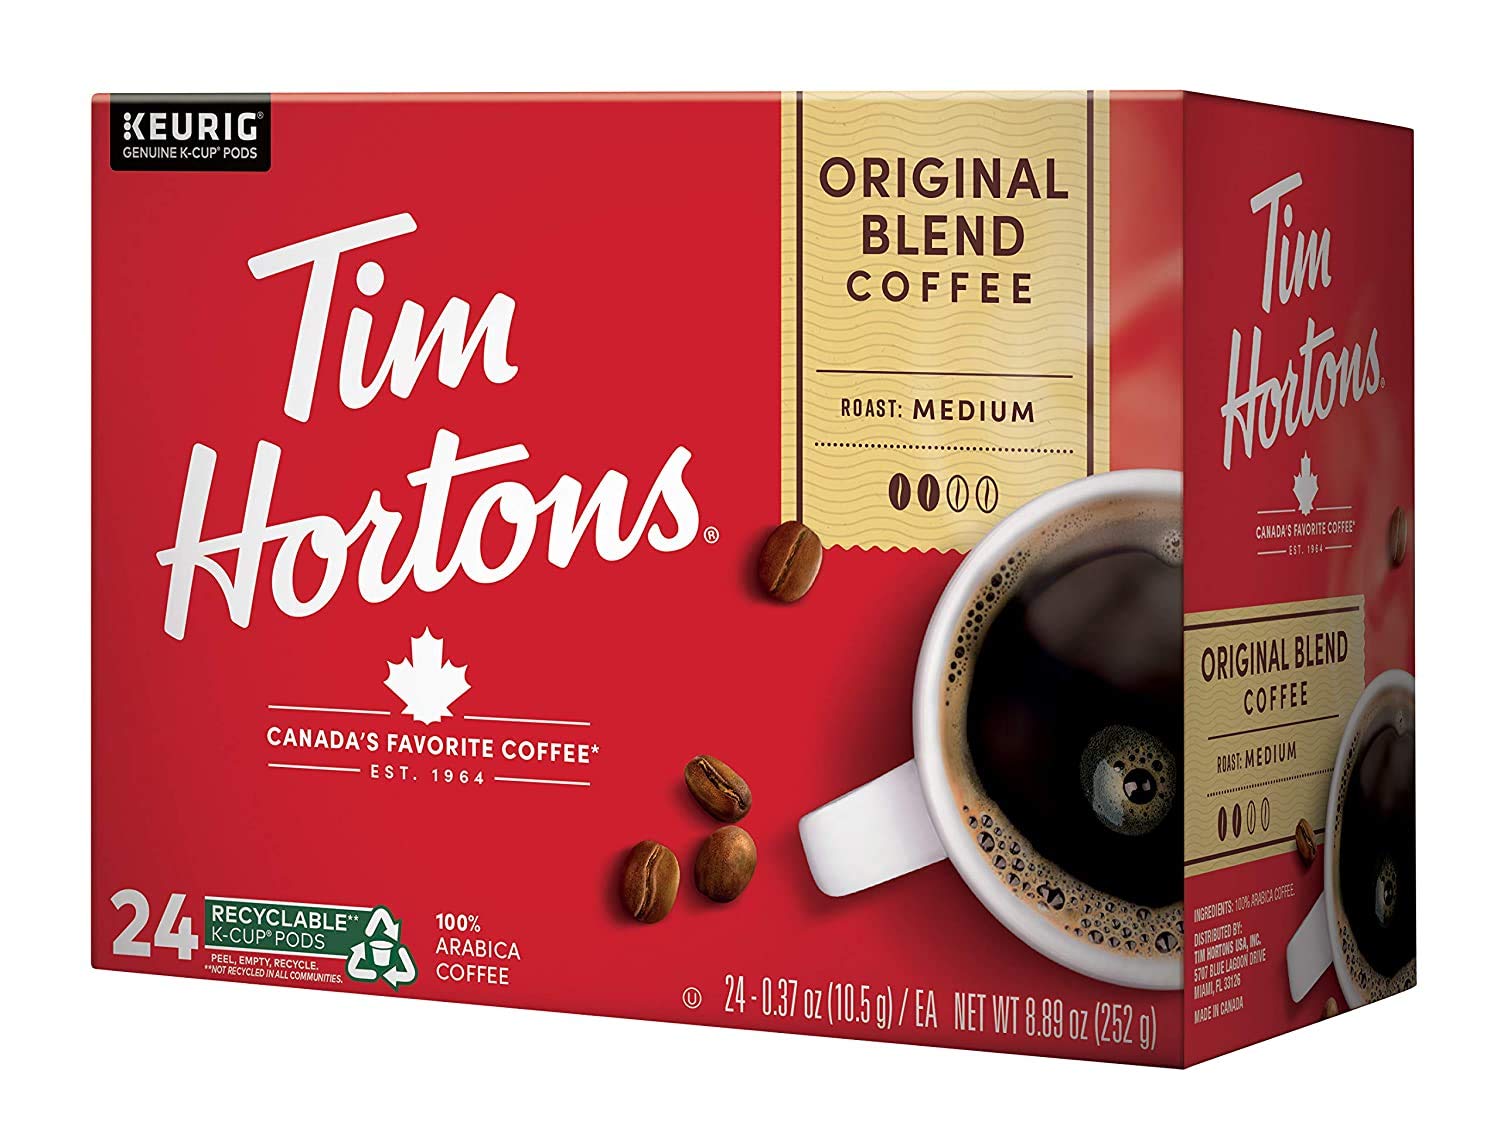 Tim Hortons Original Blend, Medium Roast Coffee, Single-Serve K-Cup Pods Compatible with Keurig Brewers, 24 Count(Pack of 1)(Packaging may vary)